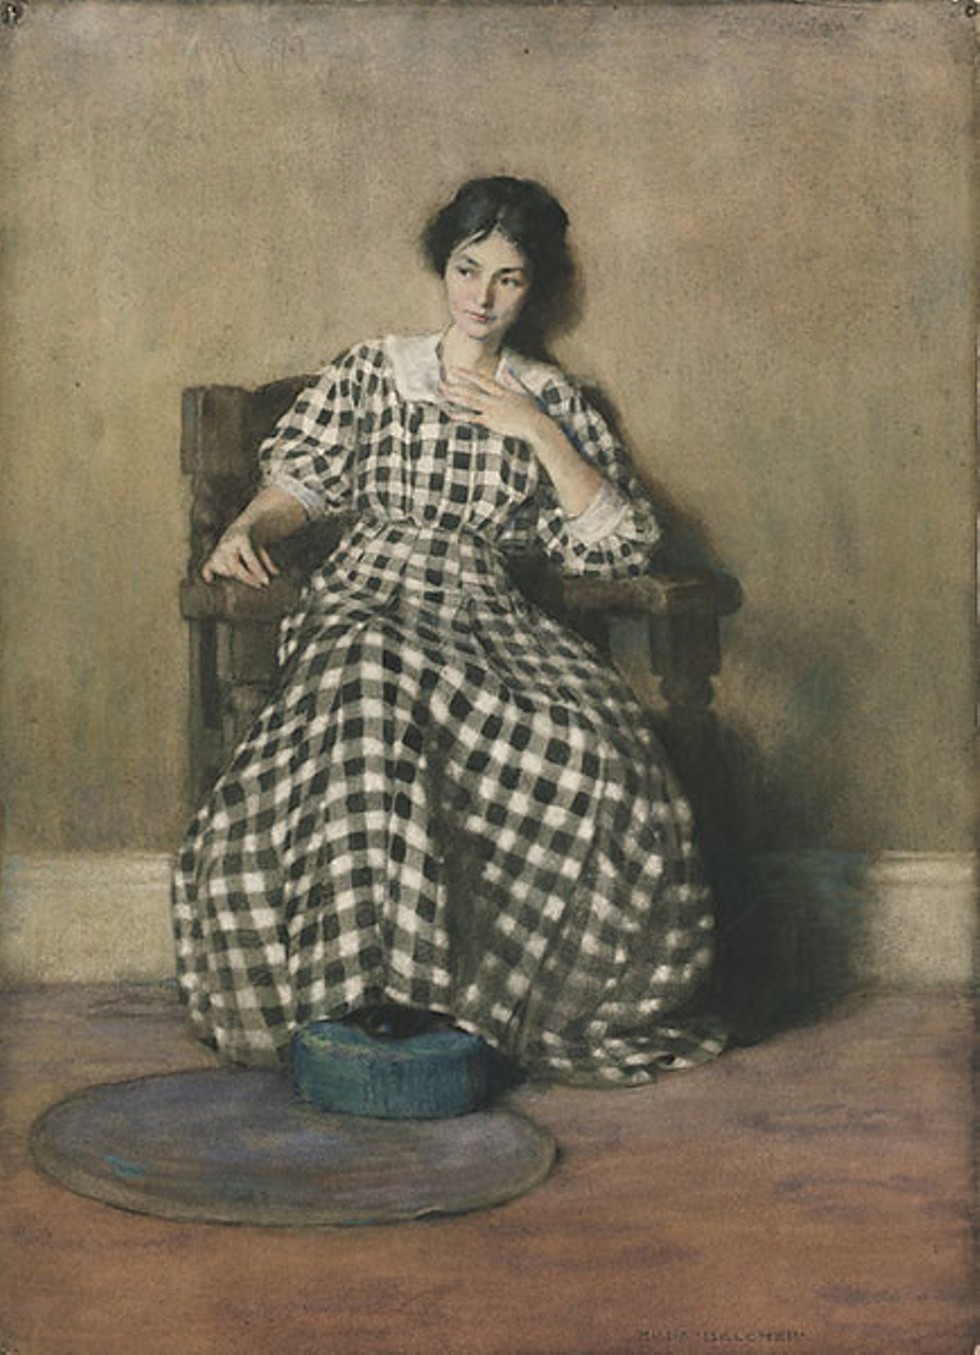 Hilda Belcher (American, 1881–1963) The Checkered Dress (Portrait of Georgia O’Keeffe), 1907 Watercolor and gouache on cream laid paper Frances Lehman Loeb Art Center, Vassar College Bequest of Mary S. Bedell, class of 1873, 1932.1.5